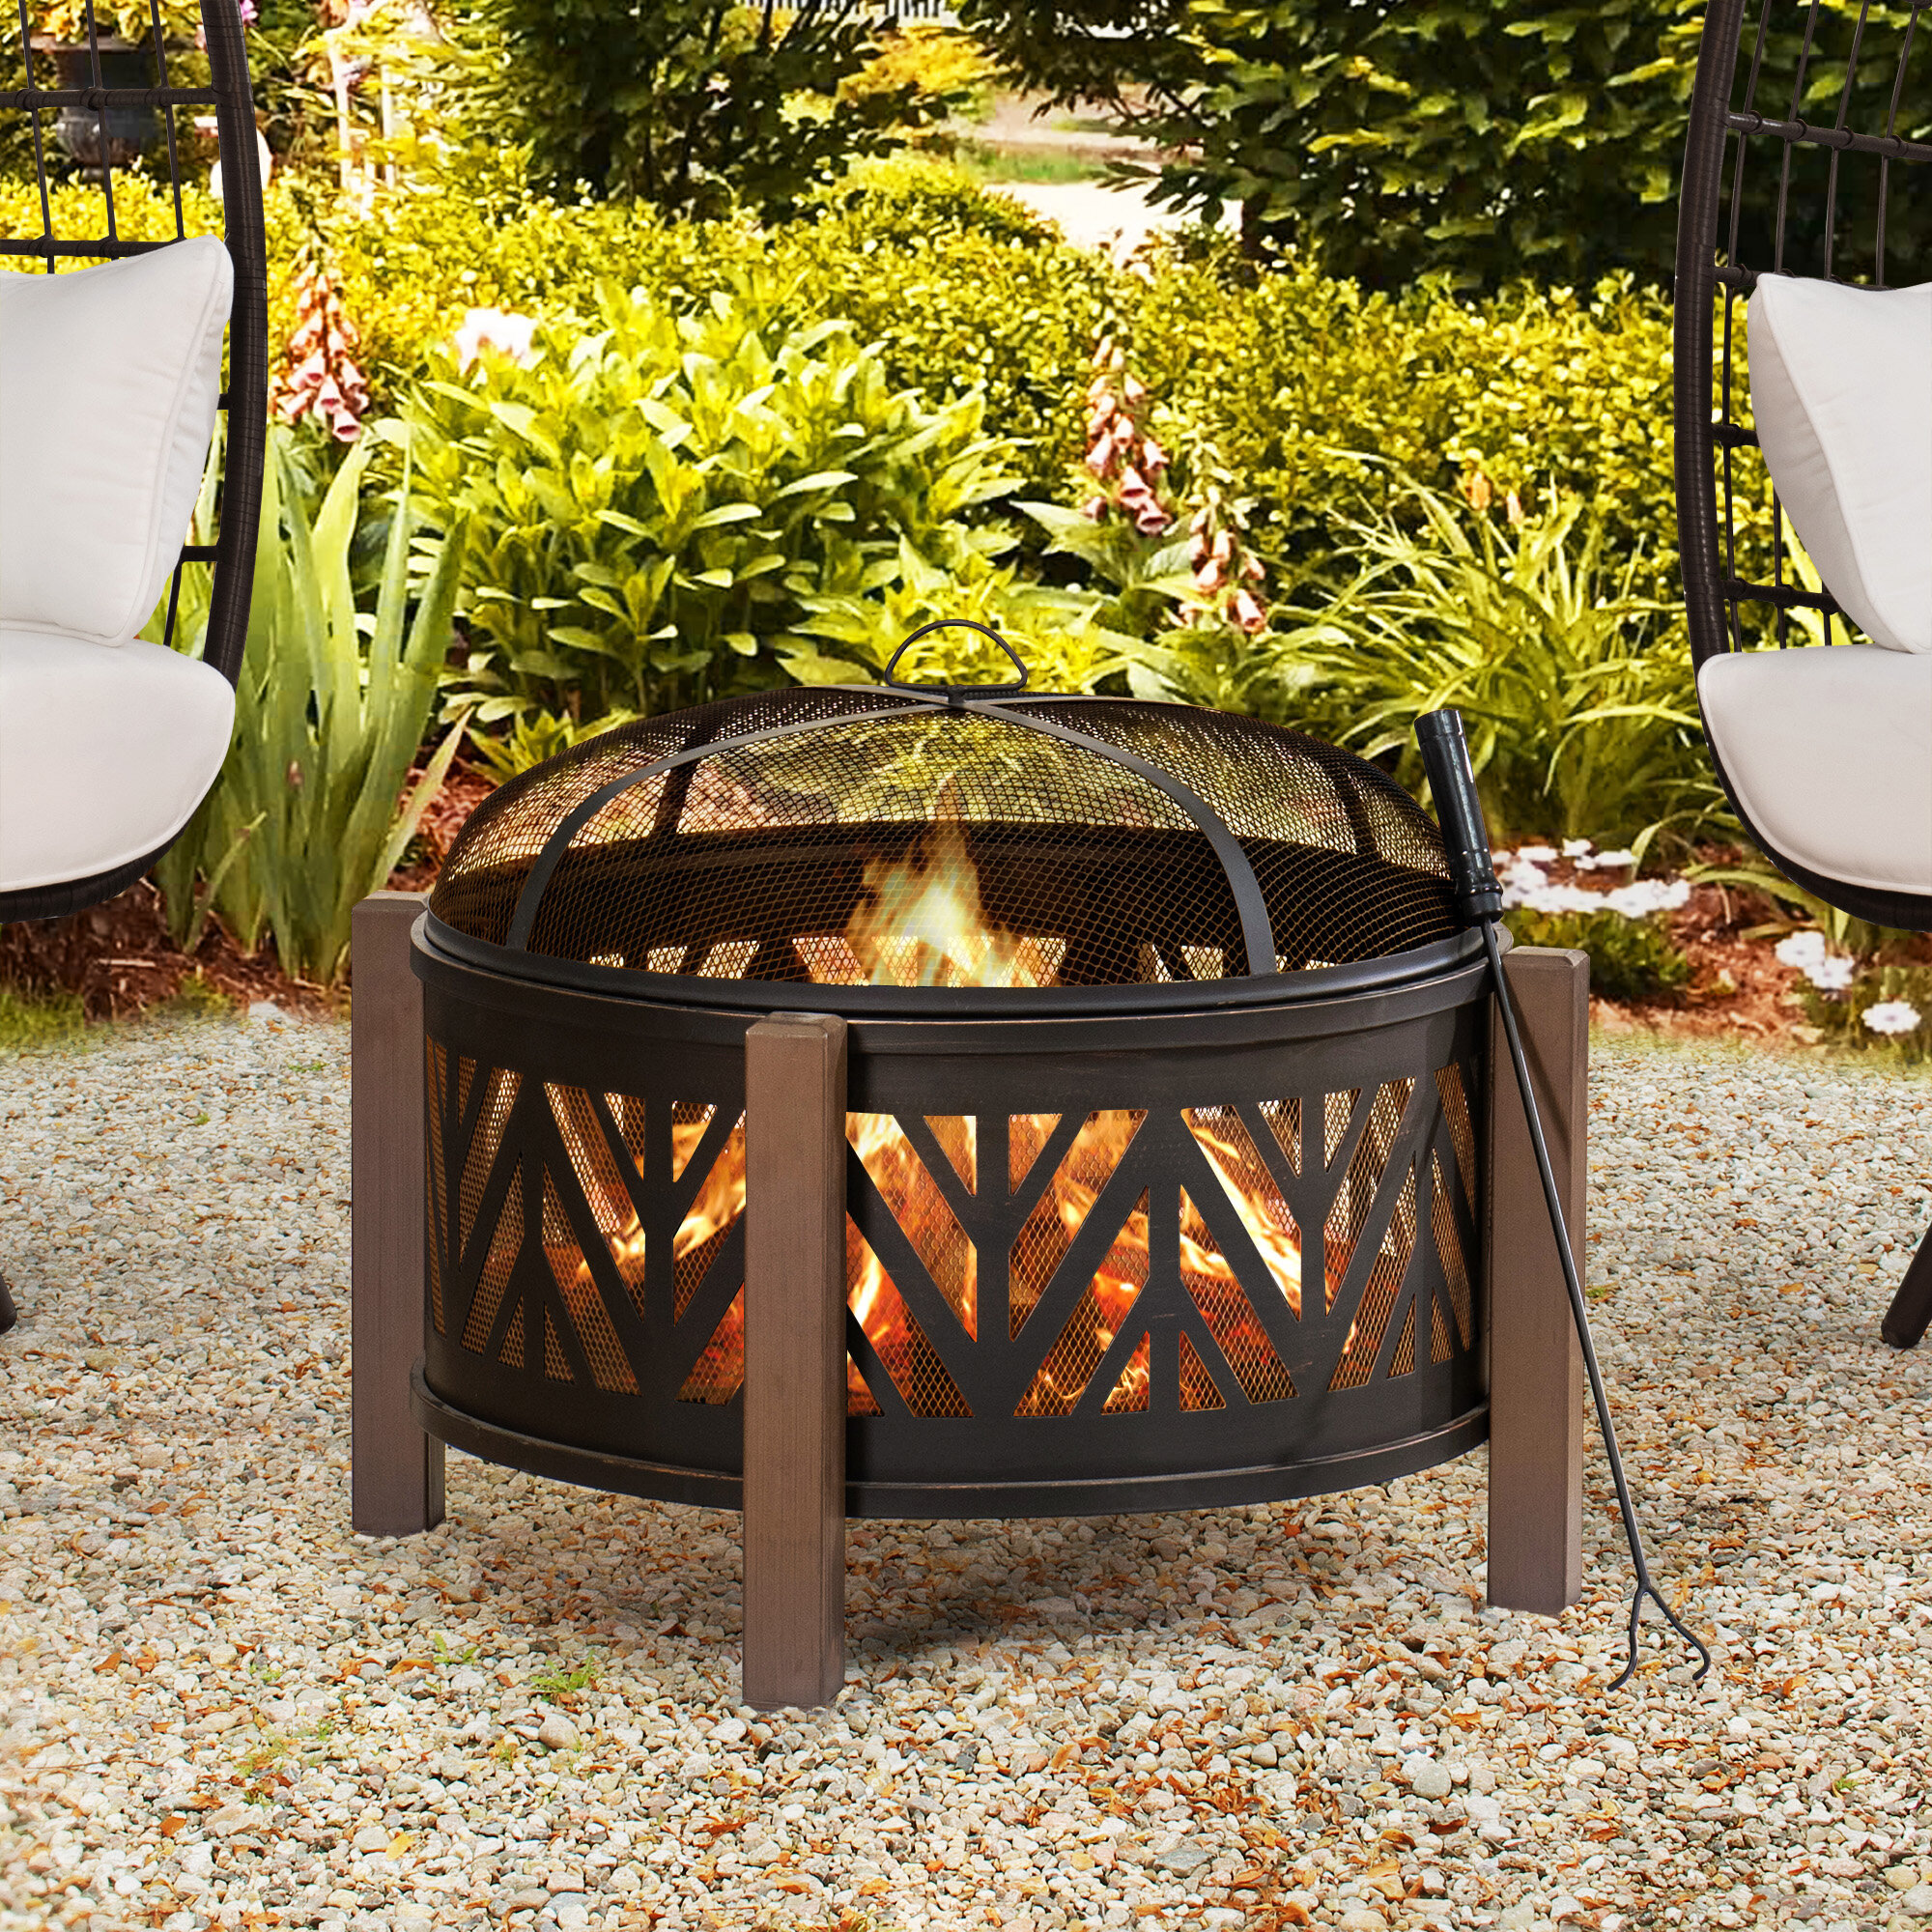 Steel Wood Burning Fire PitSpark Screen Included Weather Resistant, 